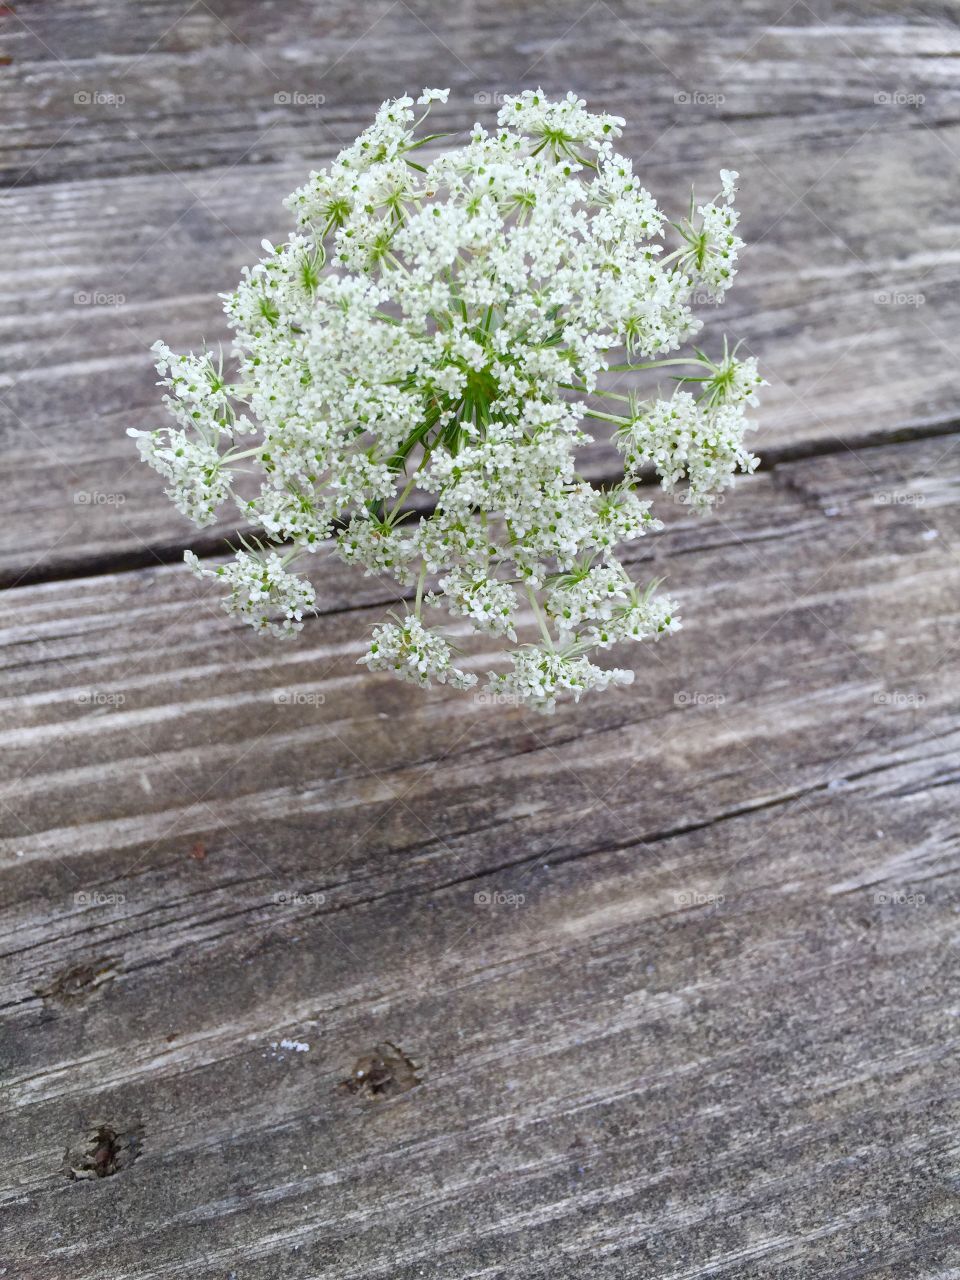 Queen Anne Lace fowler /weed on weathered wood table.